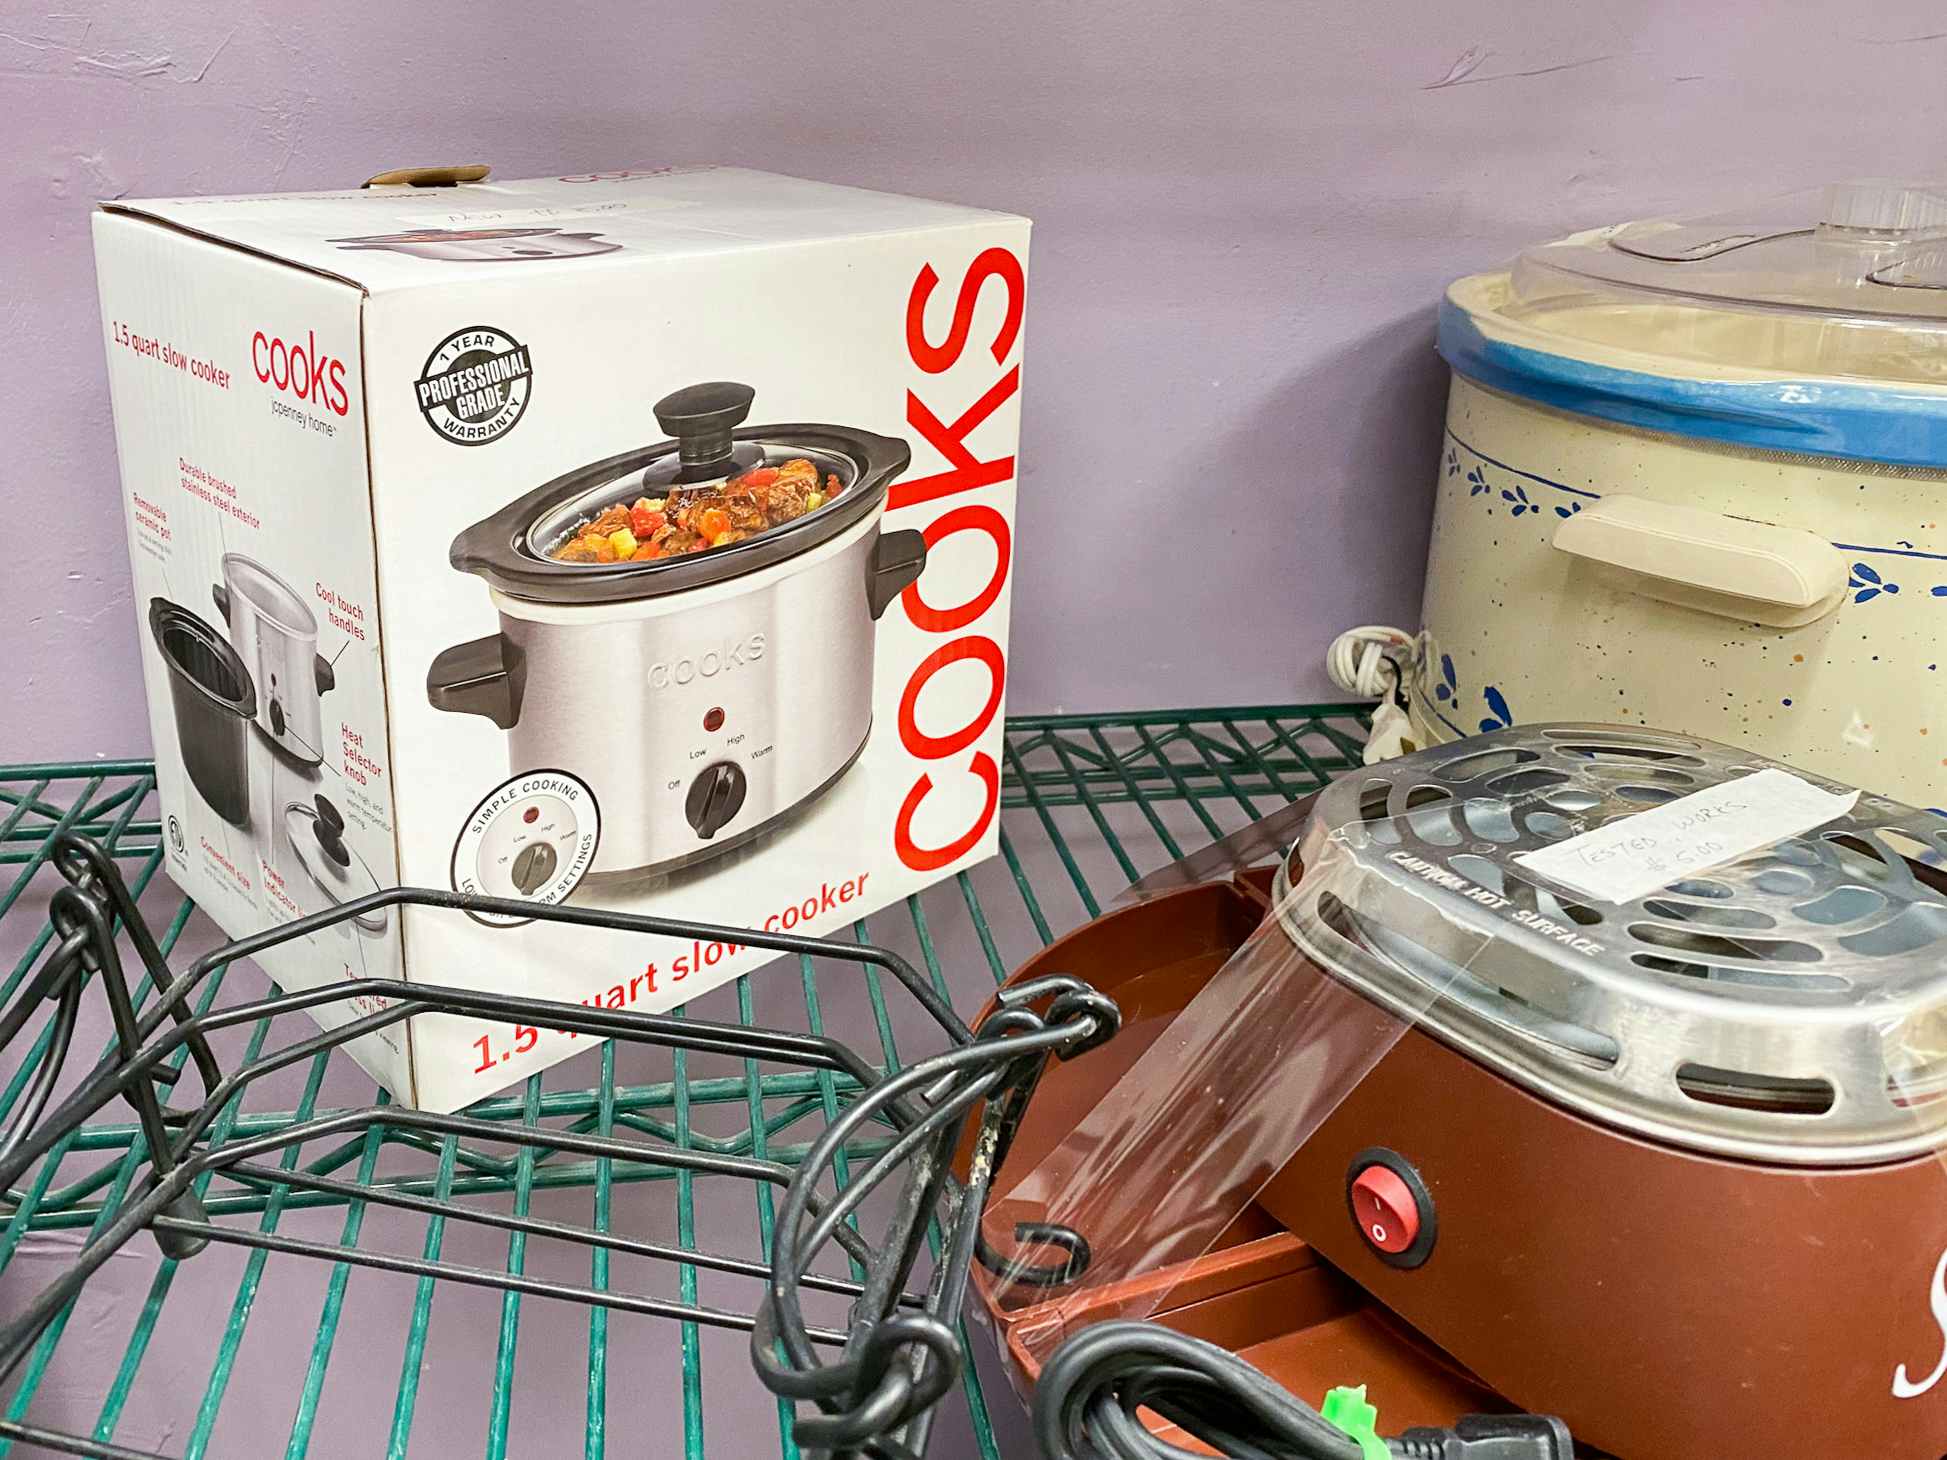 A Cooks slow cooker on a shelf in a thrift store.